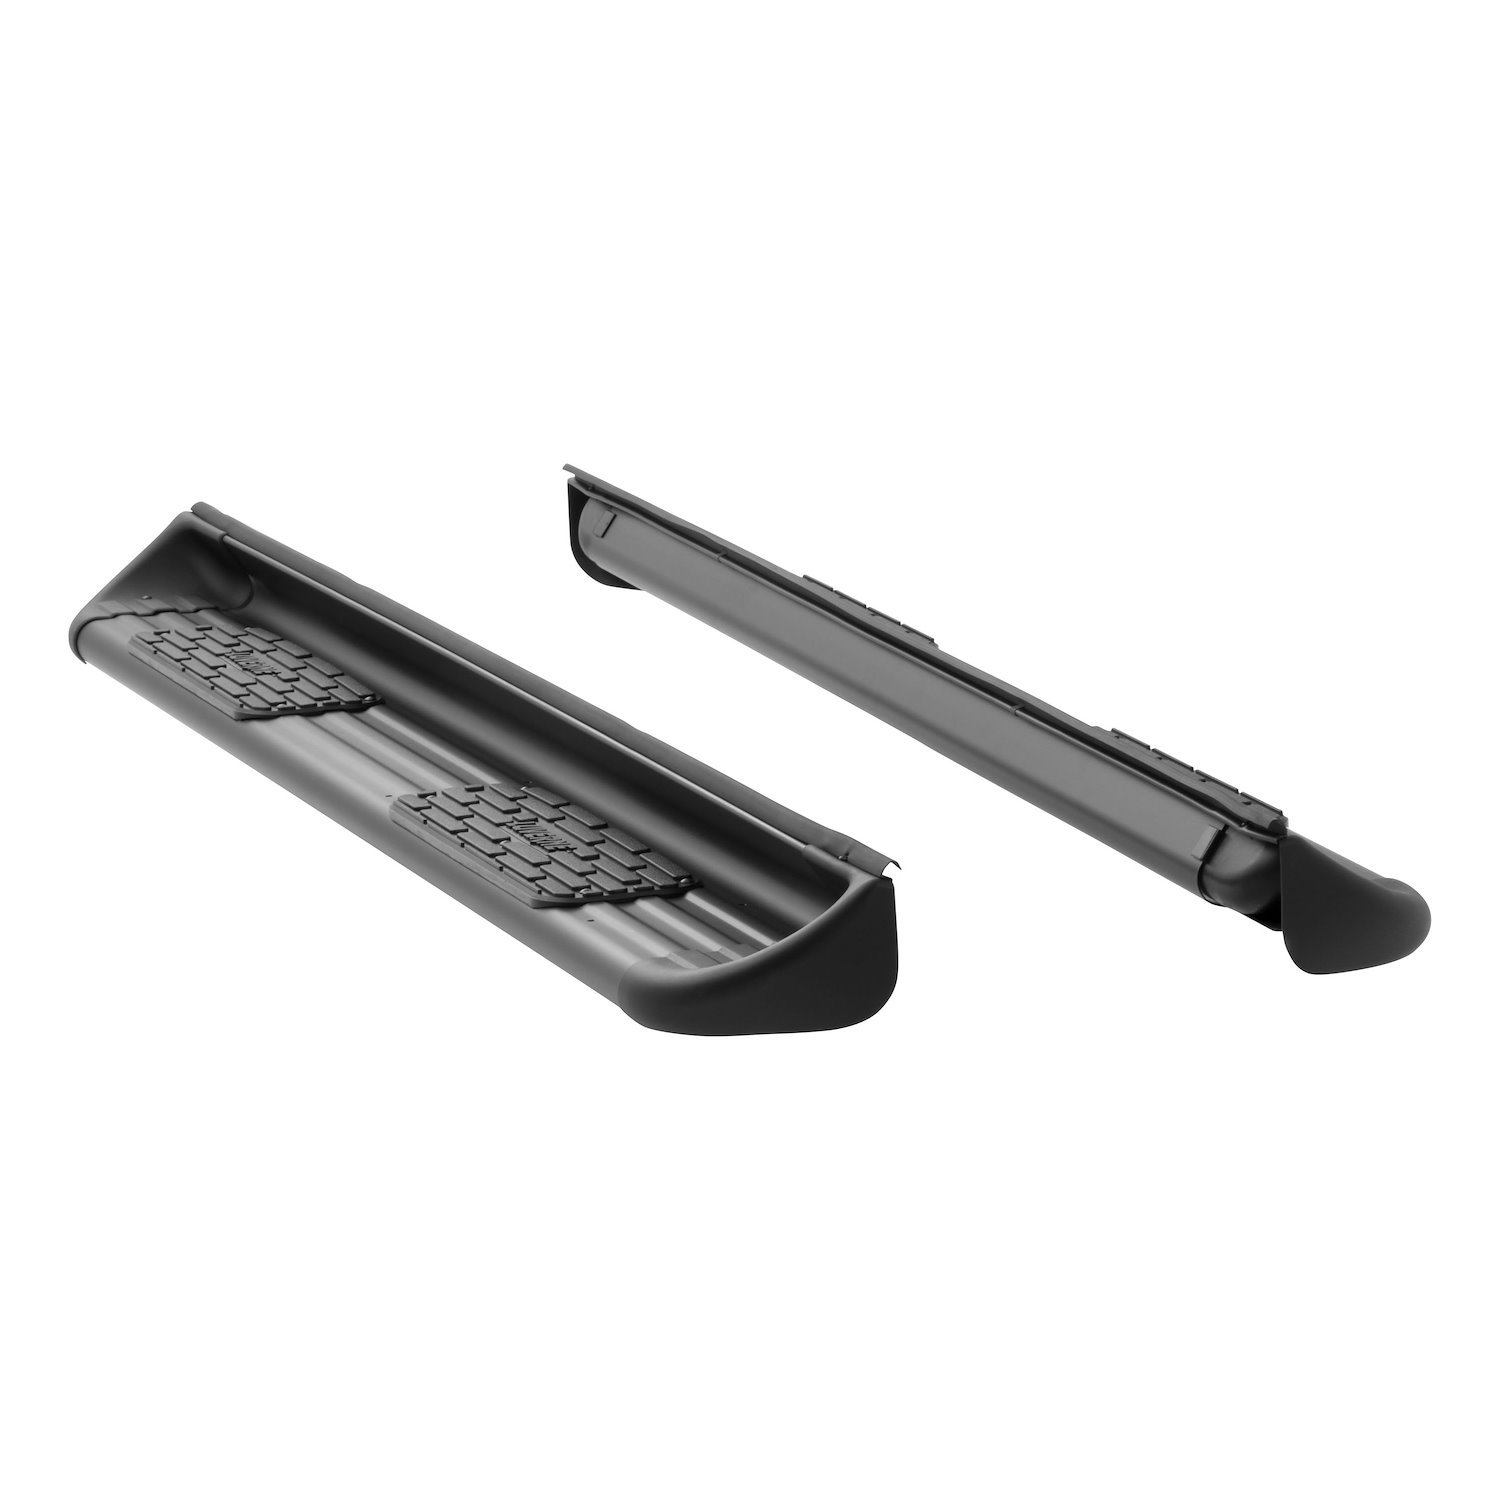 280743-580743 Black Stainless Steel Side Entry Steps Fits Select Chevy Silverado, GMC Sierra Crew Cab